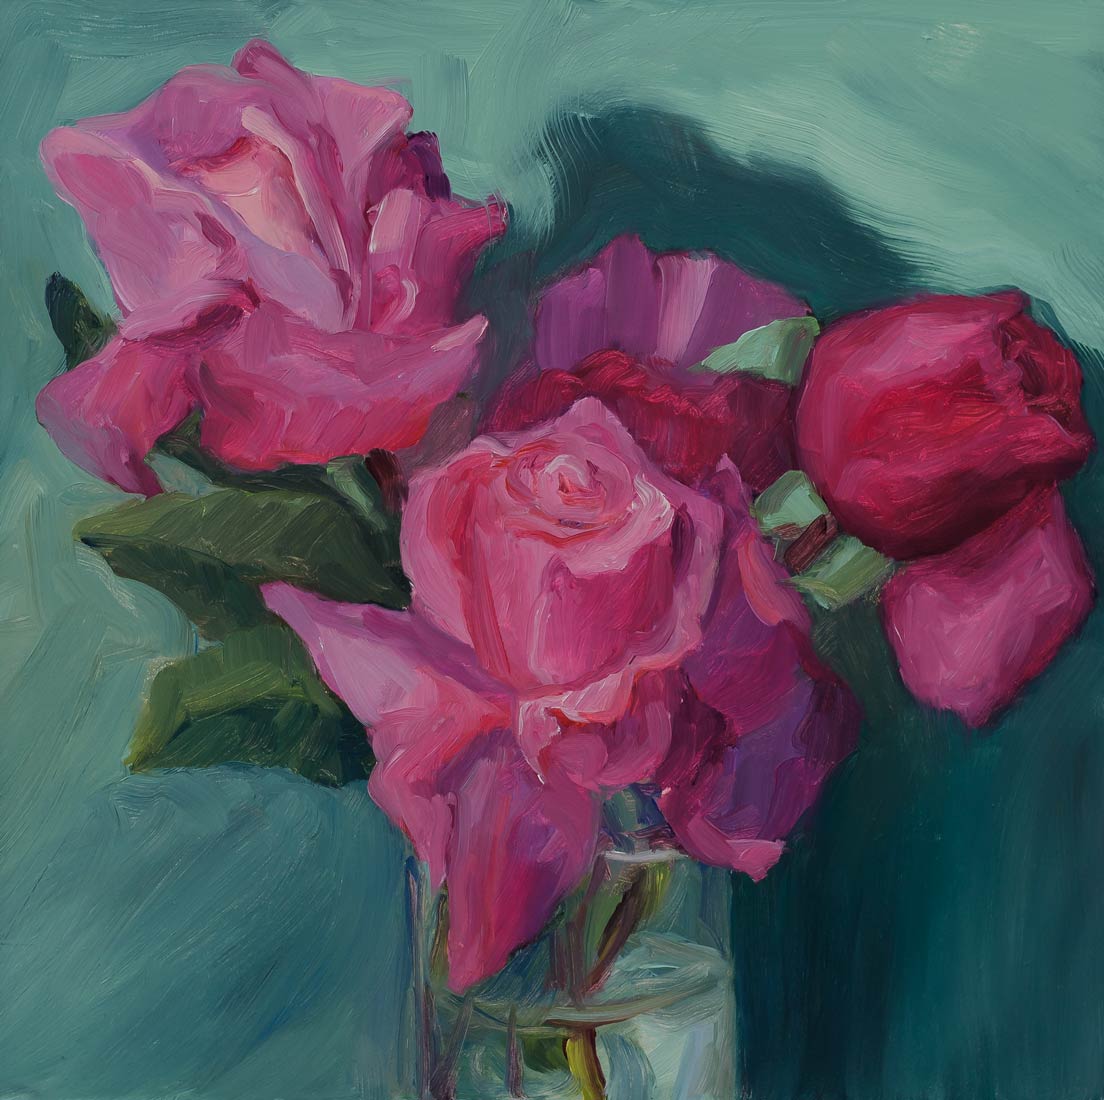 Stolen Roses, oil painting on panel, 8x8"